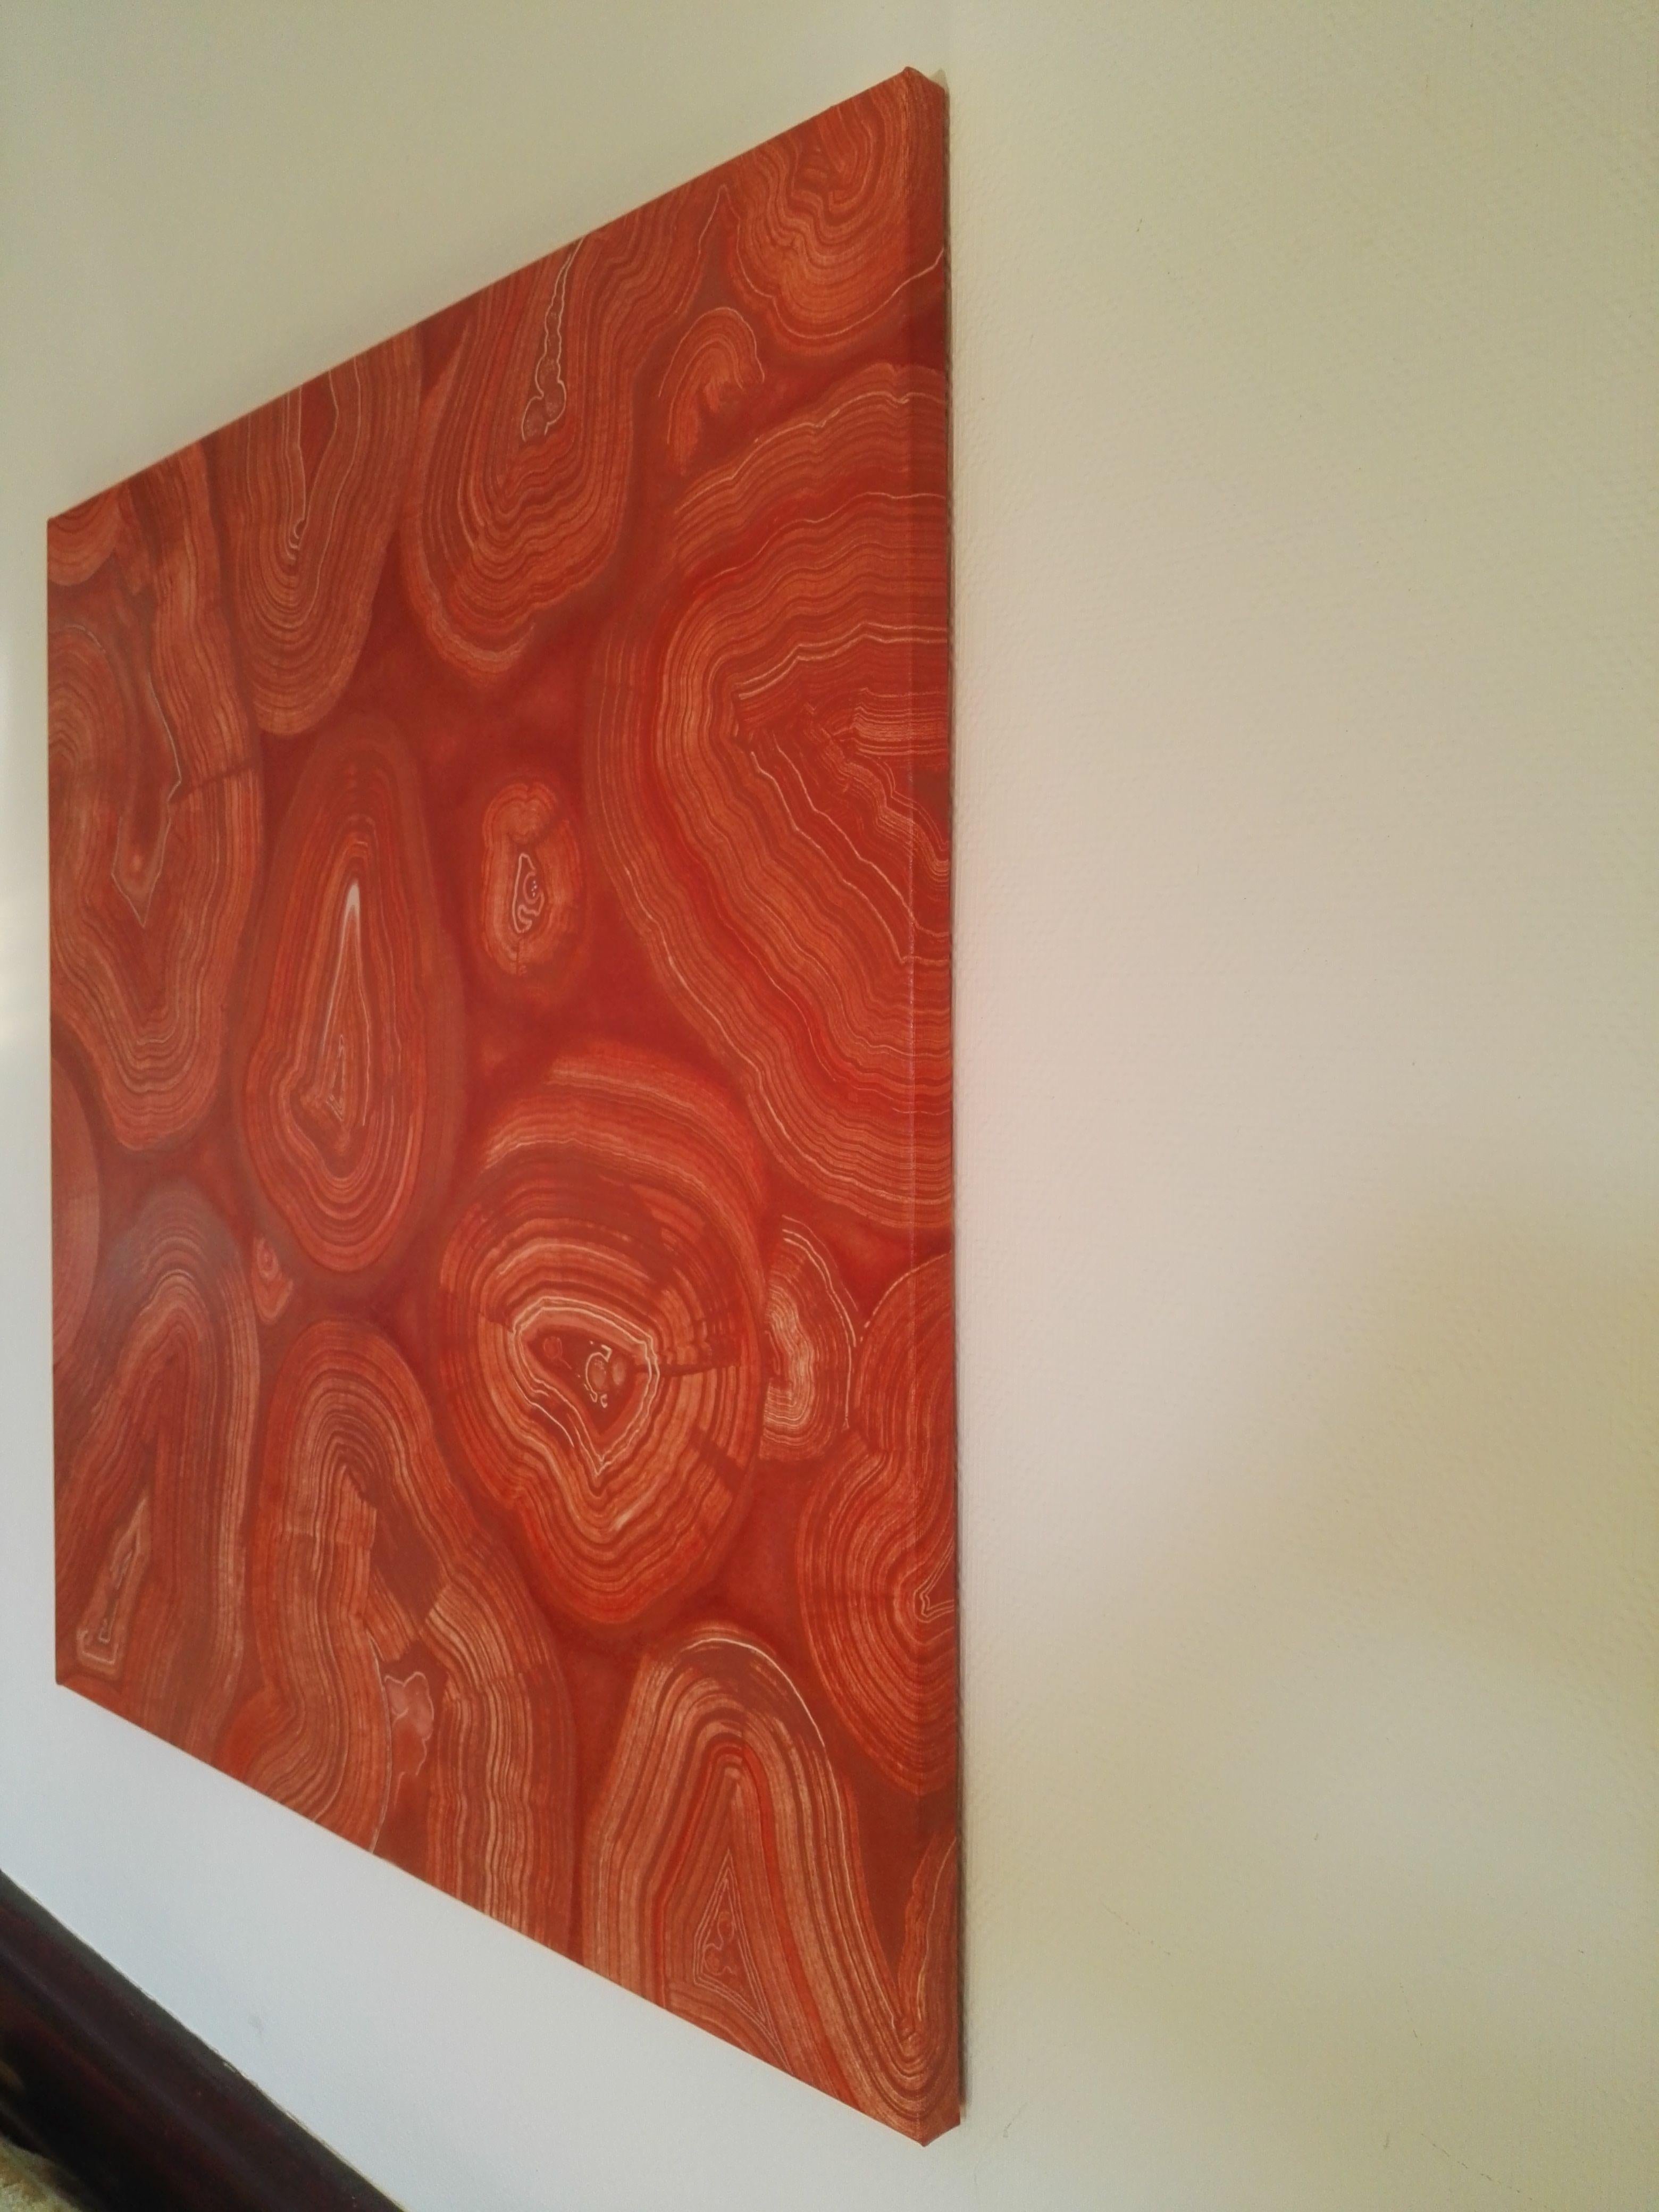 Agate textures and formations painted in acrylic on stretched canvas.     Celebrating the natural occurring colours, hues, shapes and patterns created through time and natural processes. How these relate to our own experiences that shape our own